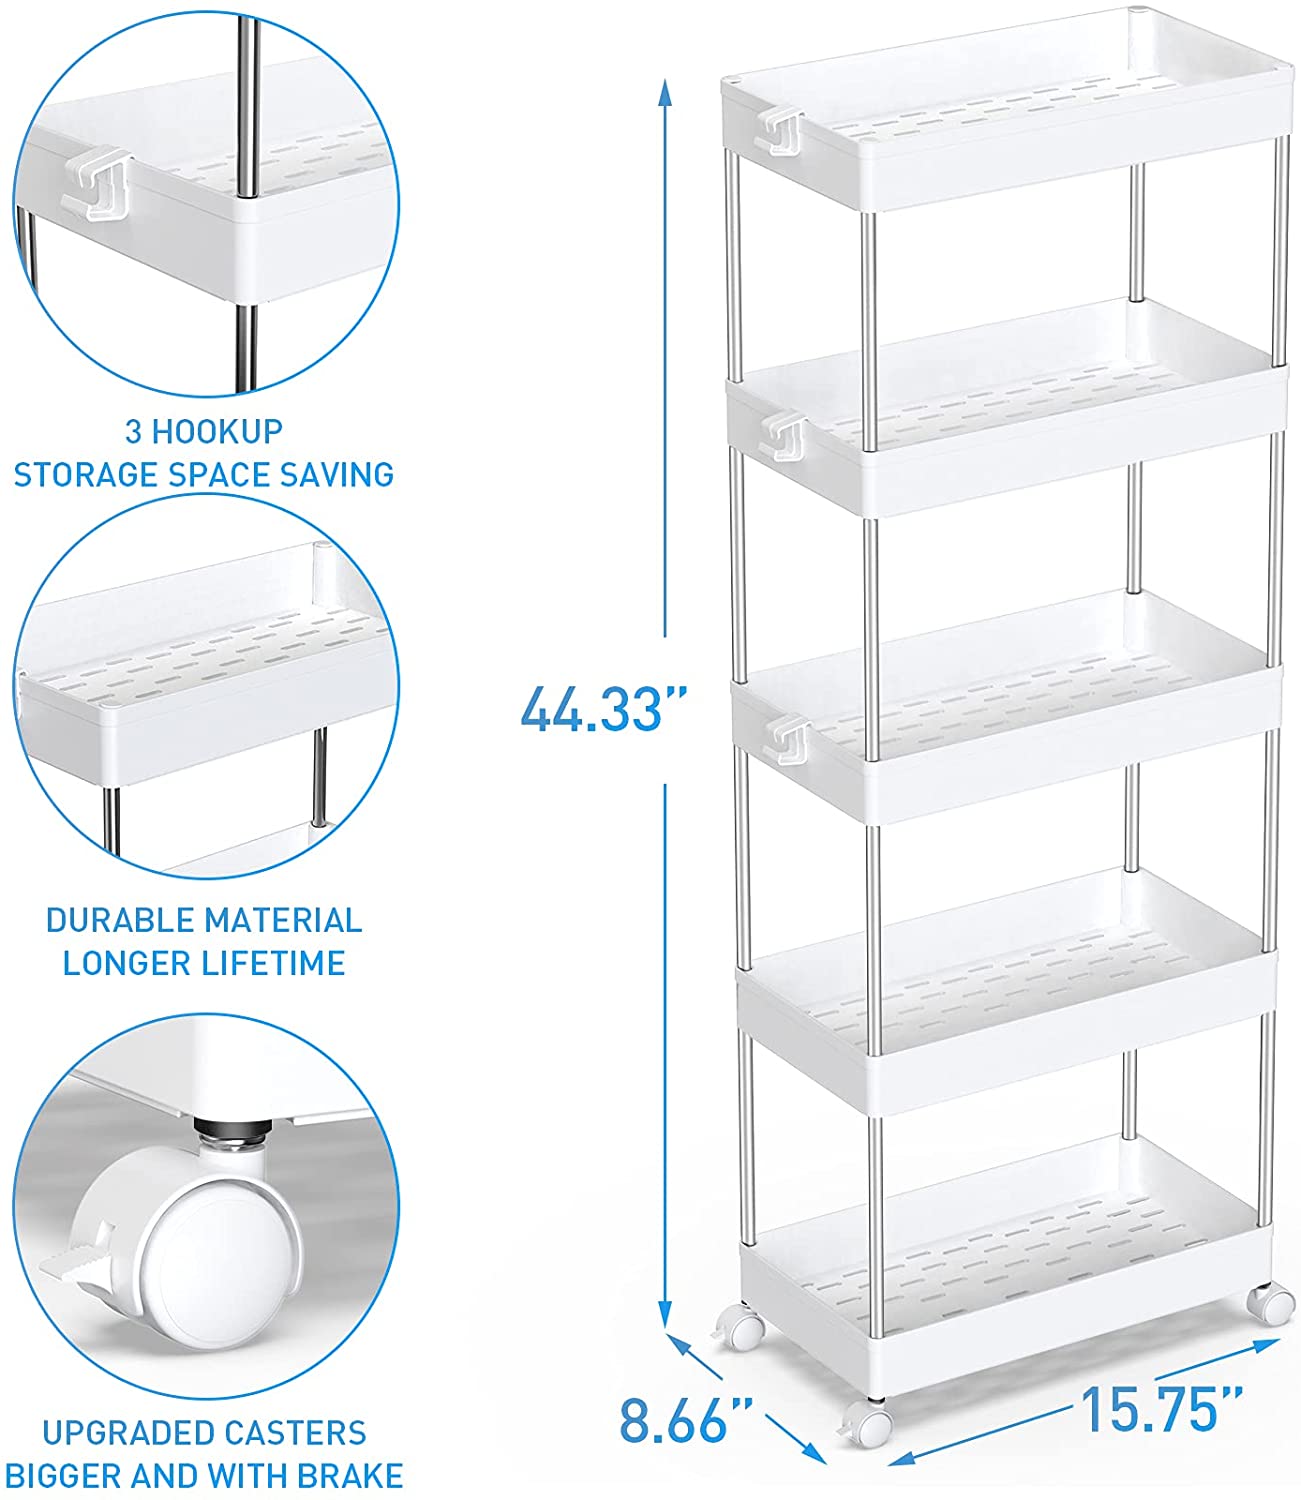 SPACEKEEPER 5 Tier Slim Rolling Storage Cart Mobile Shelving Unit Organizer Rolling Utility Cart for Bathroom Laundry Living Room & Dressers , White